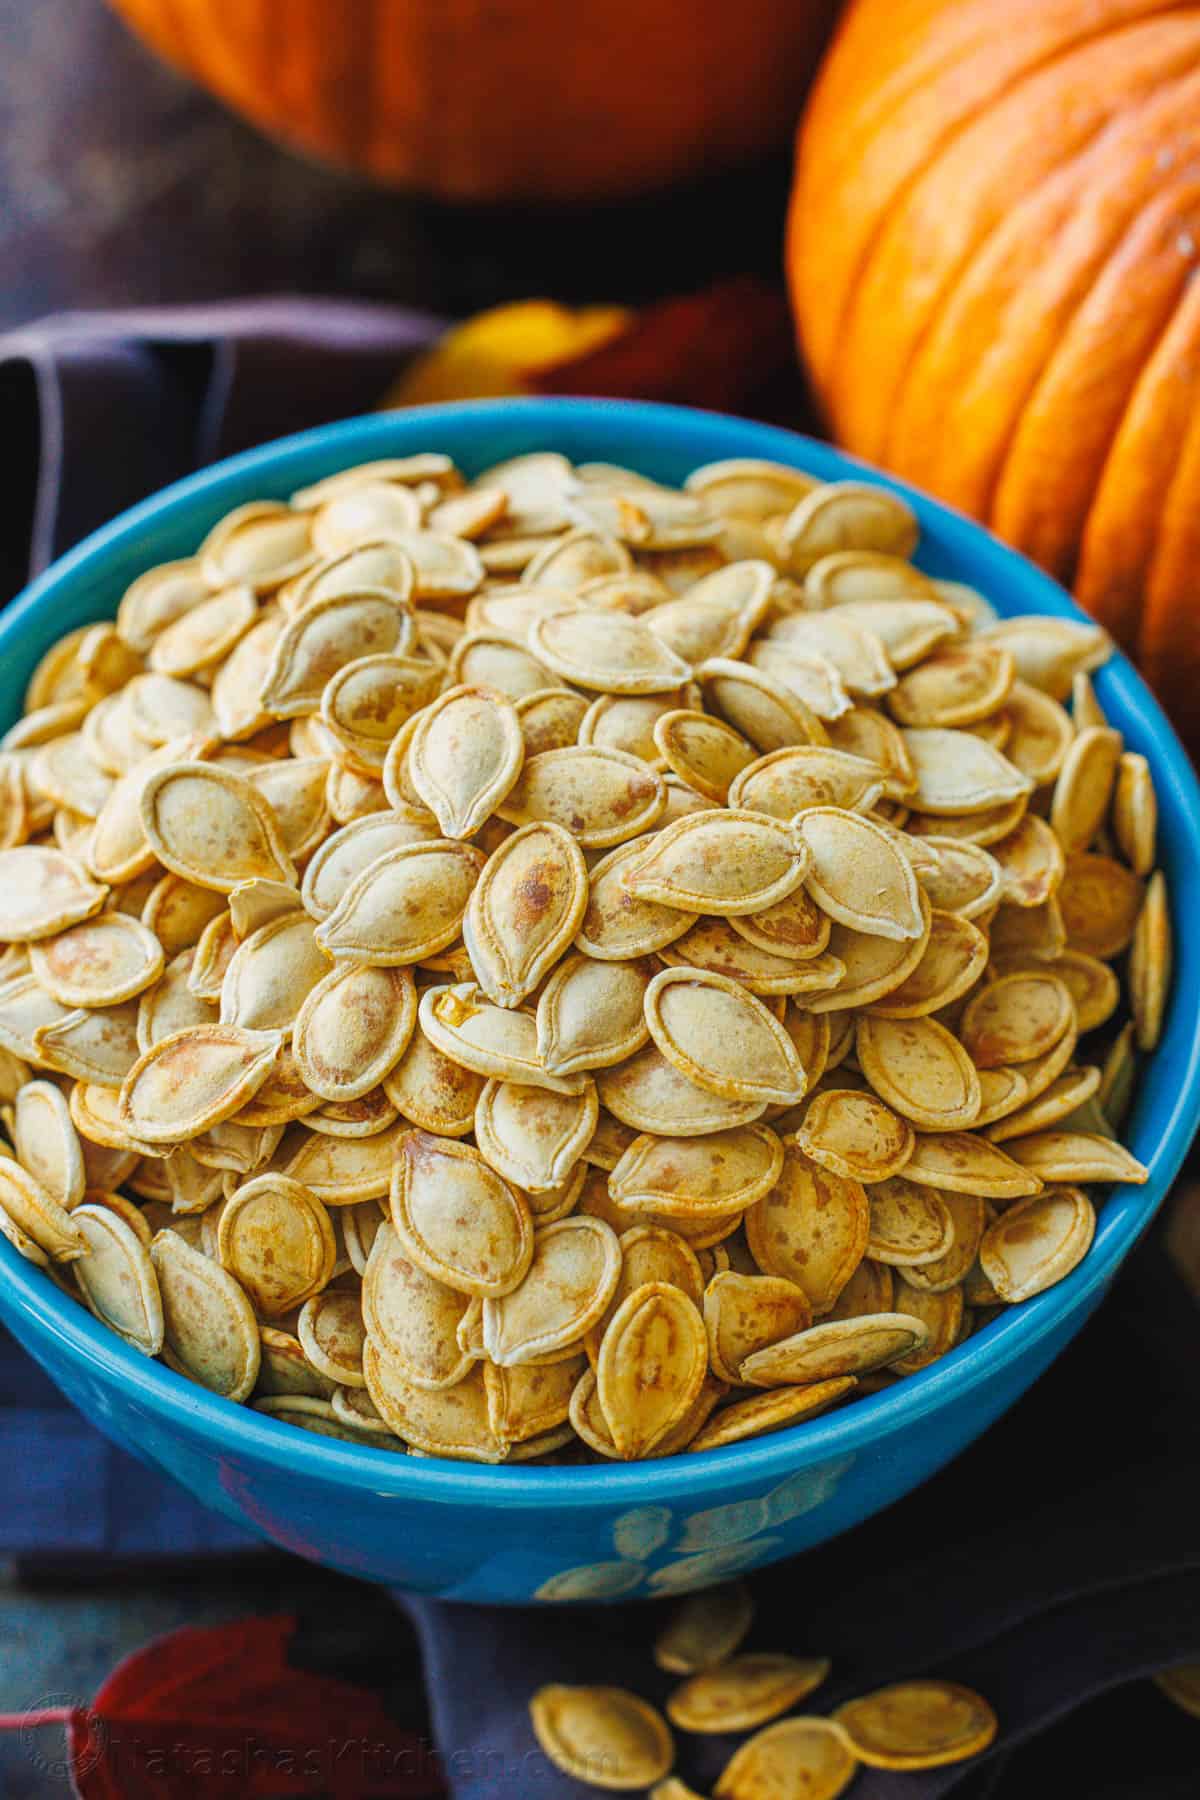 Roasted pumpkin seeds in a large blue bowl